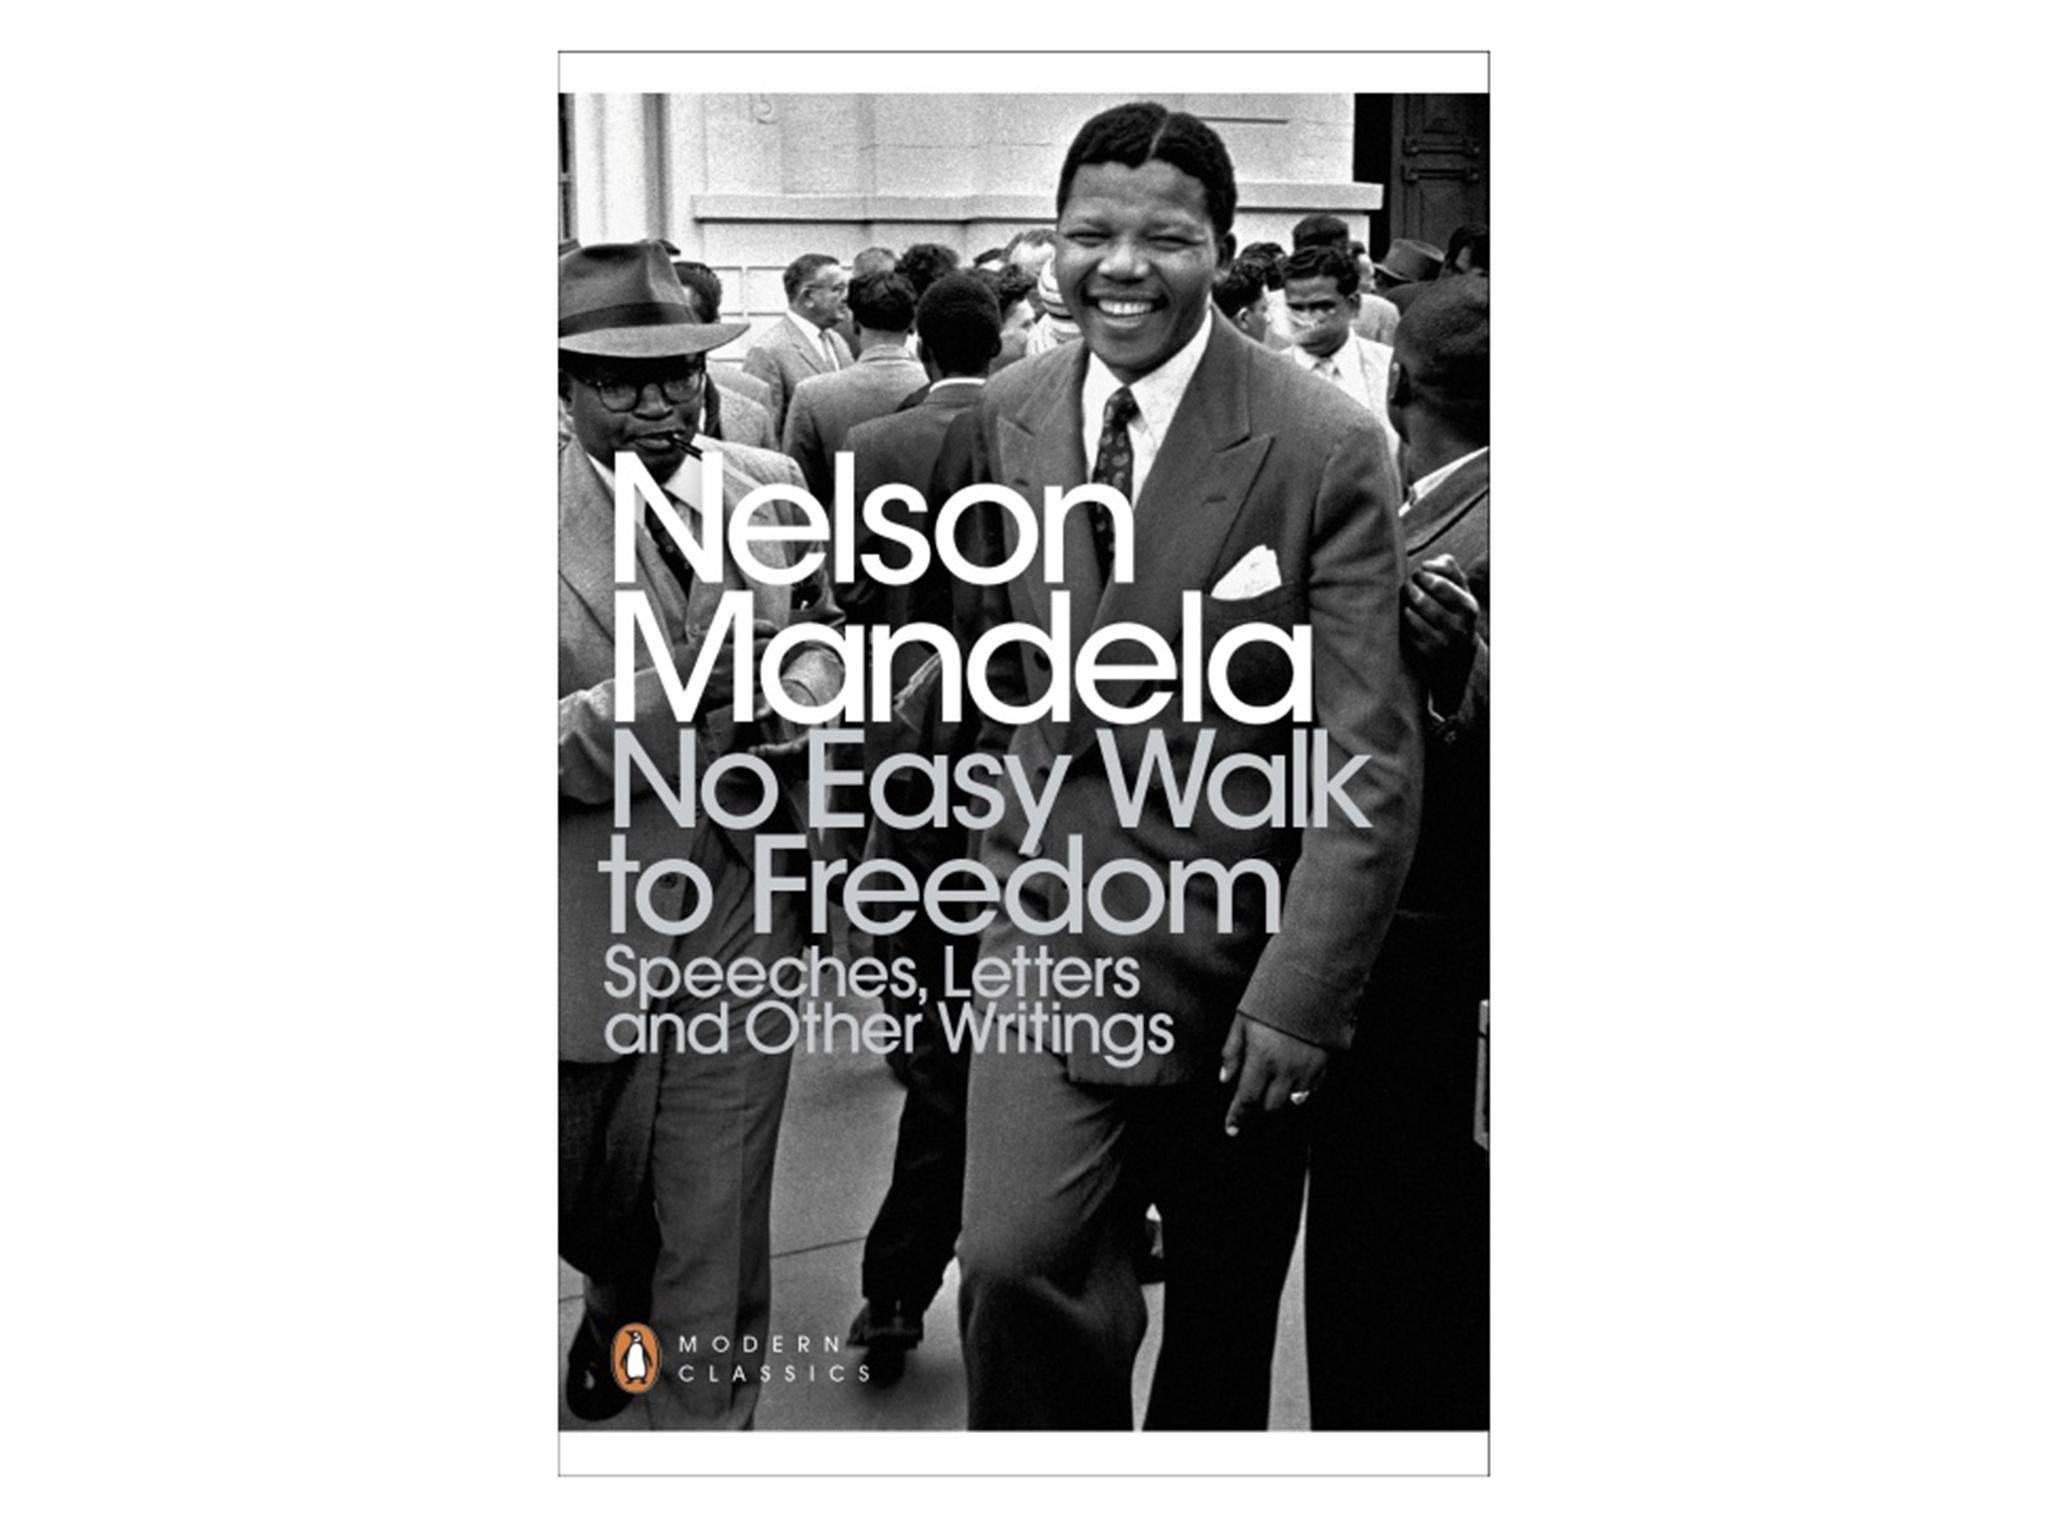 ‘No Easy Walk to Freedom’ by Nelson Mandela, published by Penguin Classics indybest